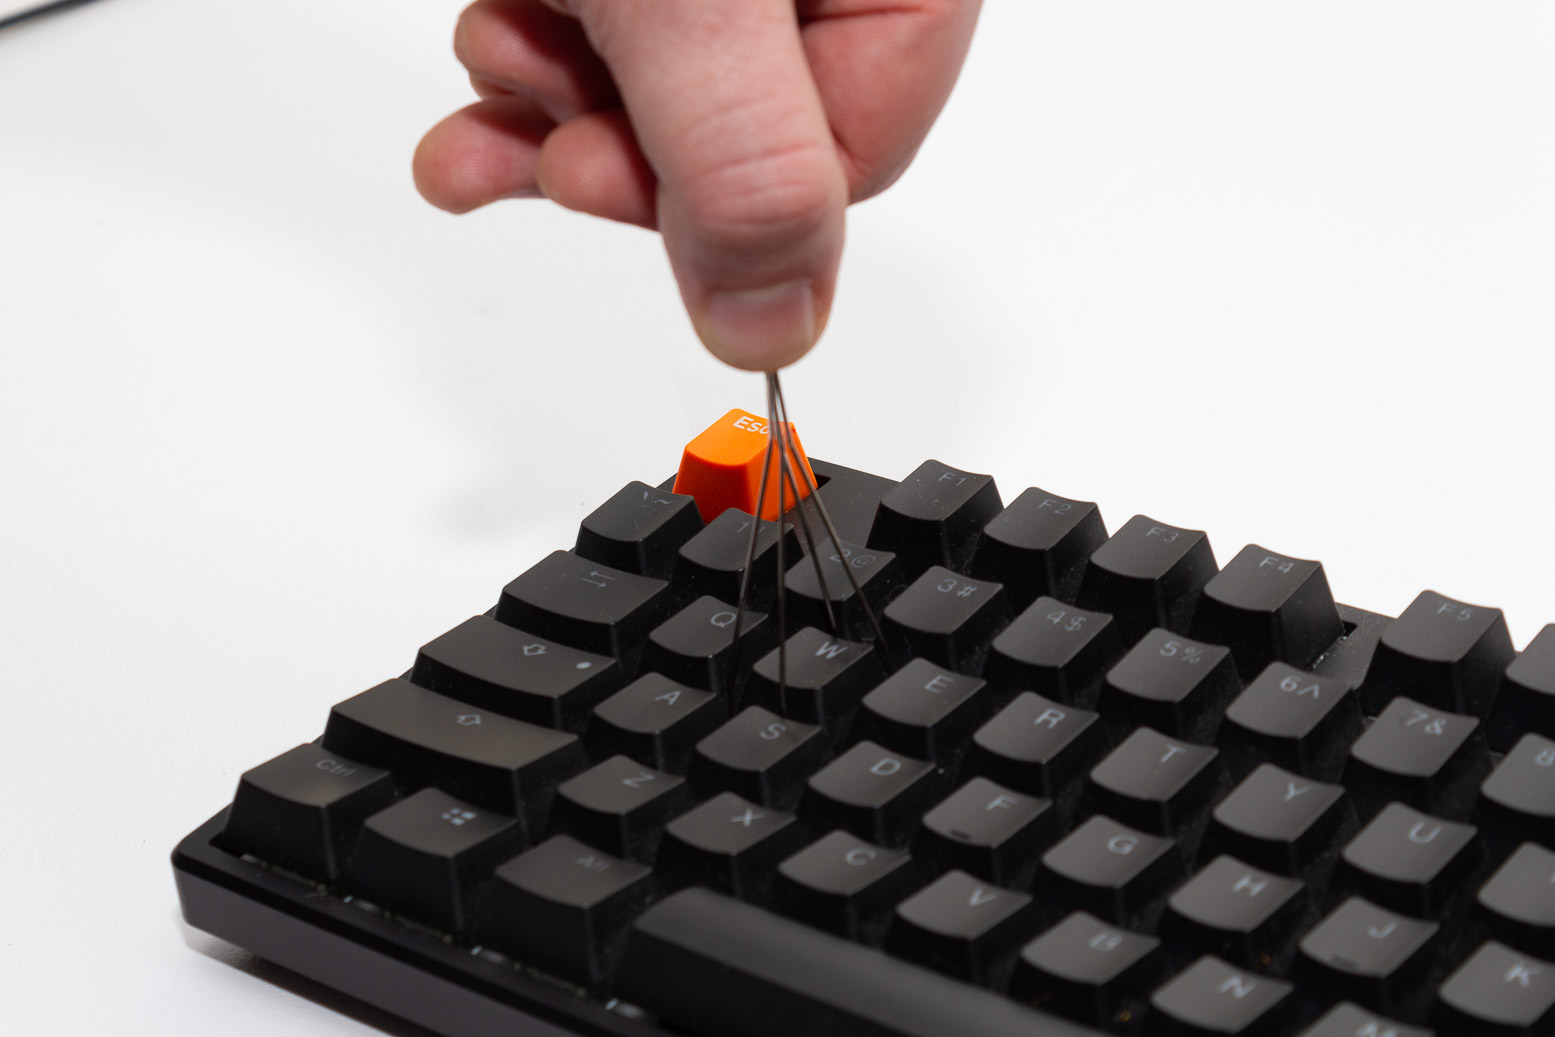 cleaning computer keyboard